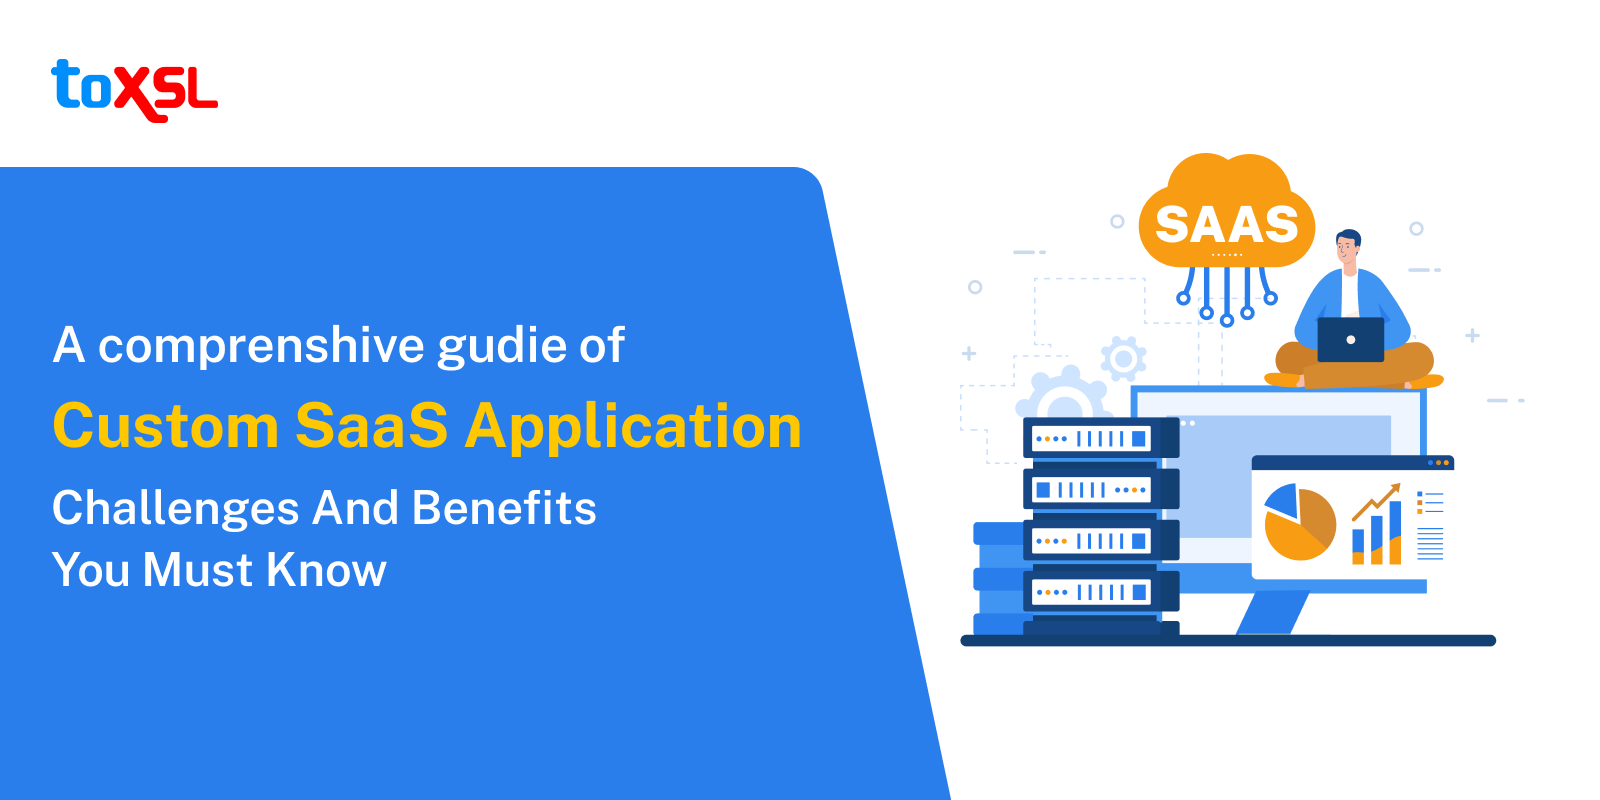 A Comprehensive Guide Of Custom SaaS Application: Challenges And Benefits You Must Know